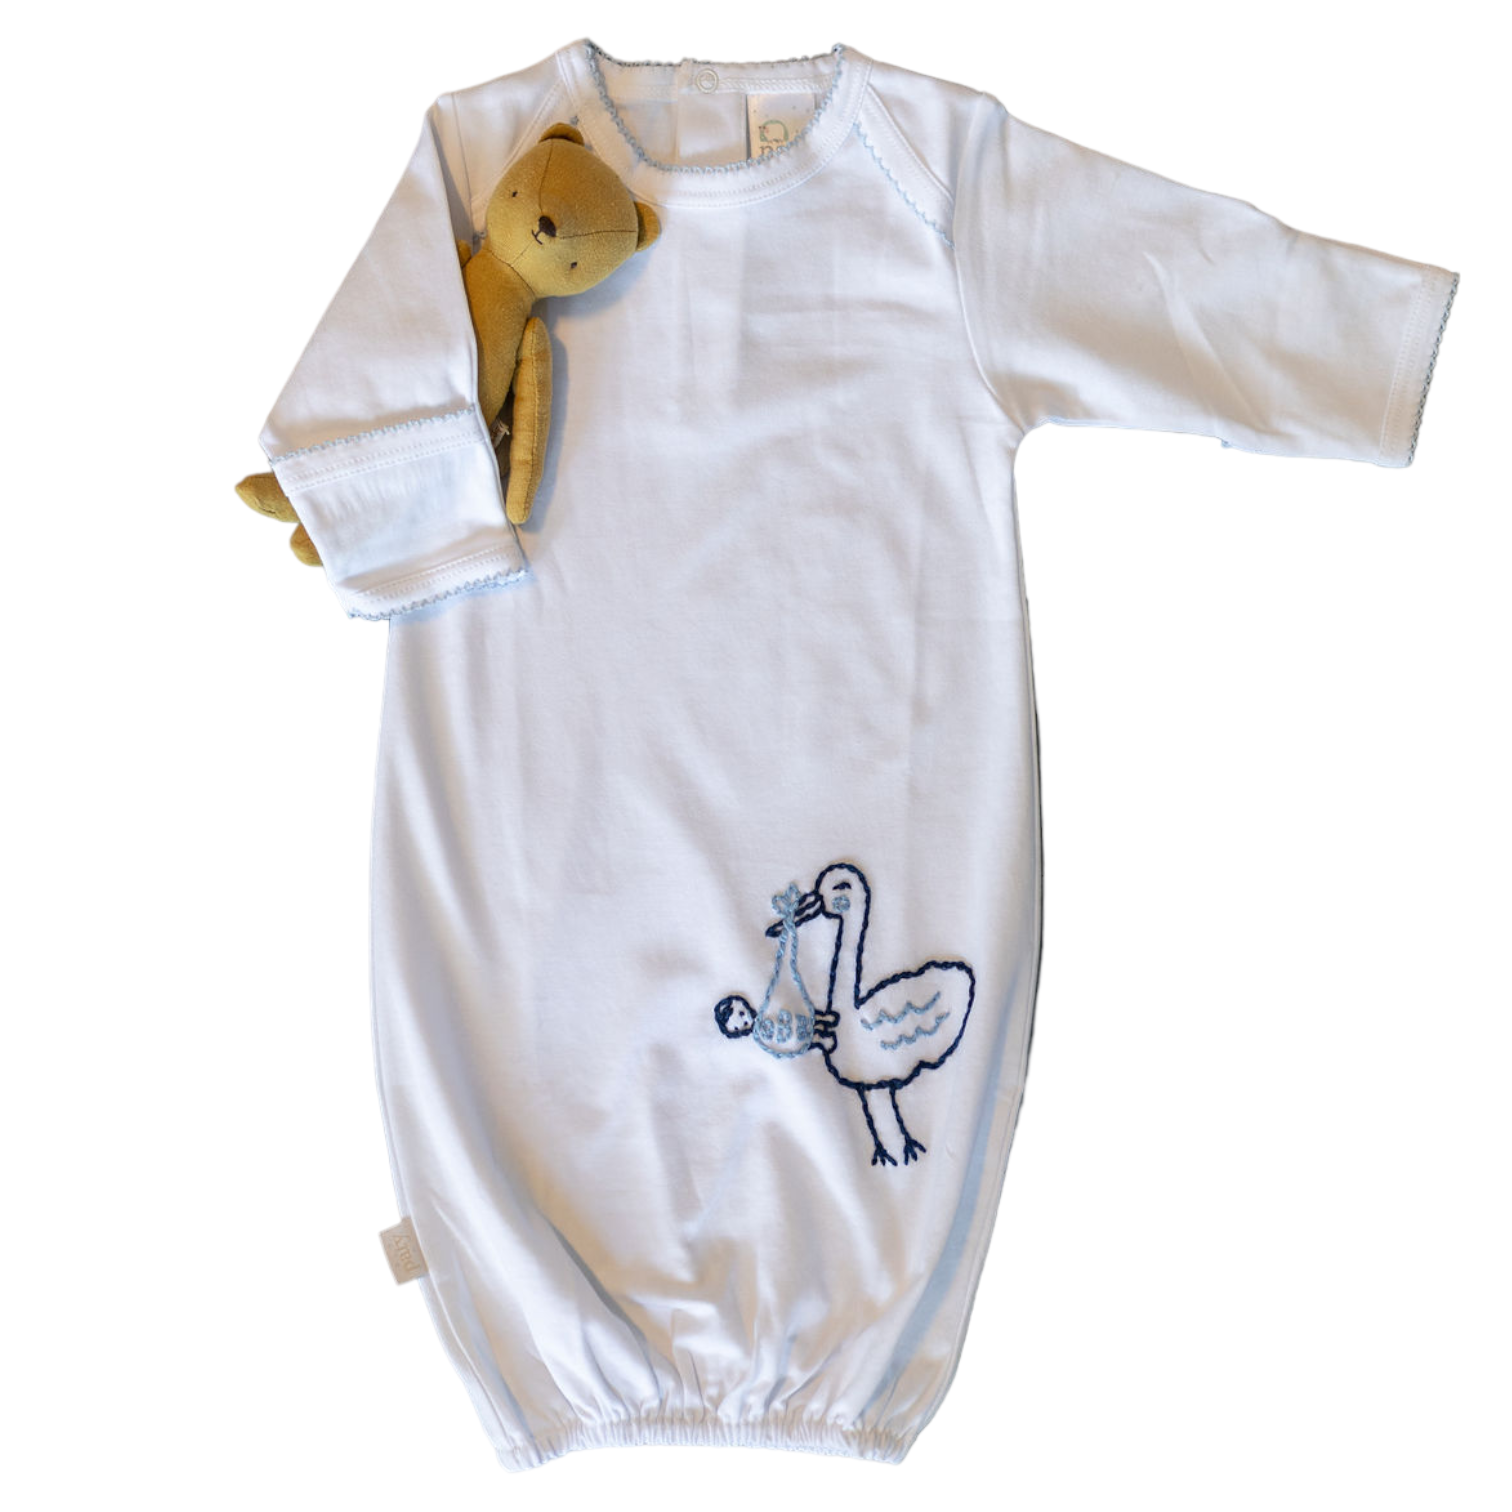 Hand-Embroidered Newborn Gown - Premium  from Tricia Lowenfield Design 